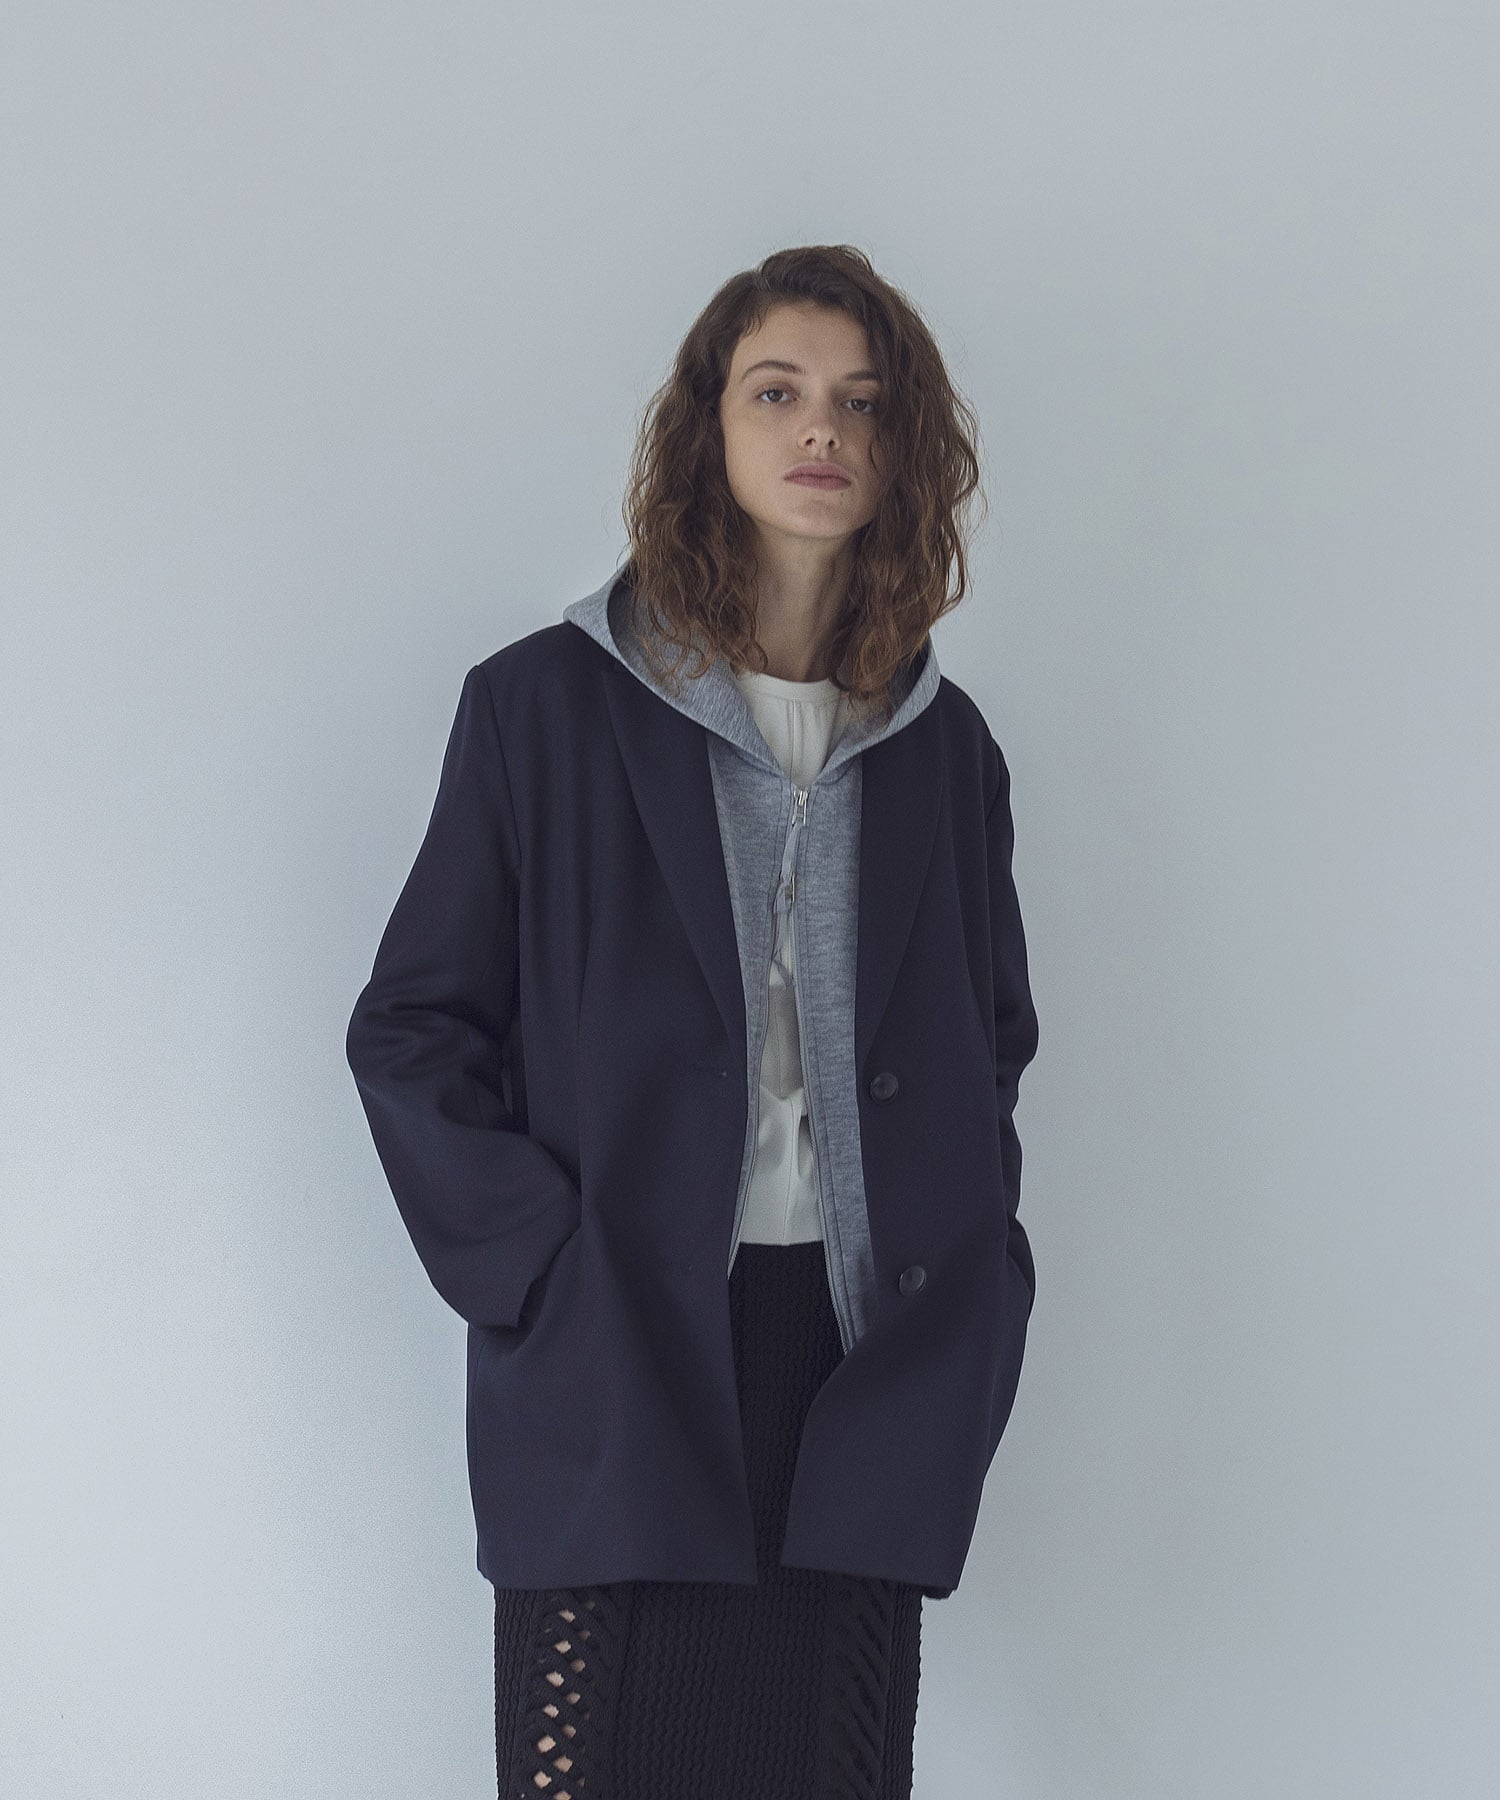 GUMI wool tailored over coat | AND ON JIONE STORE（アンドオン ...